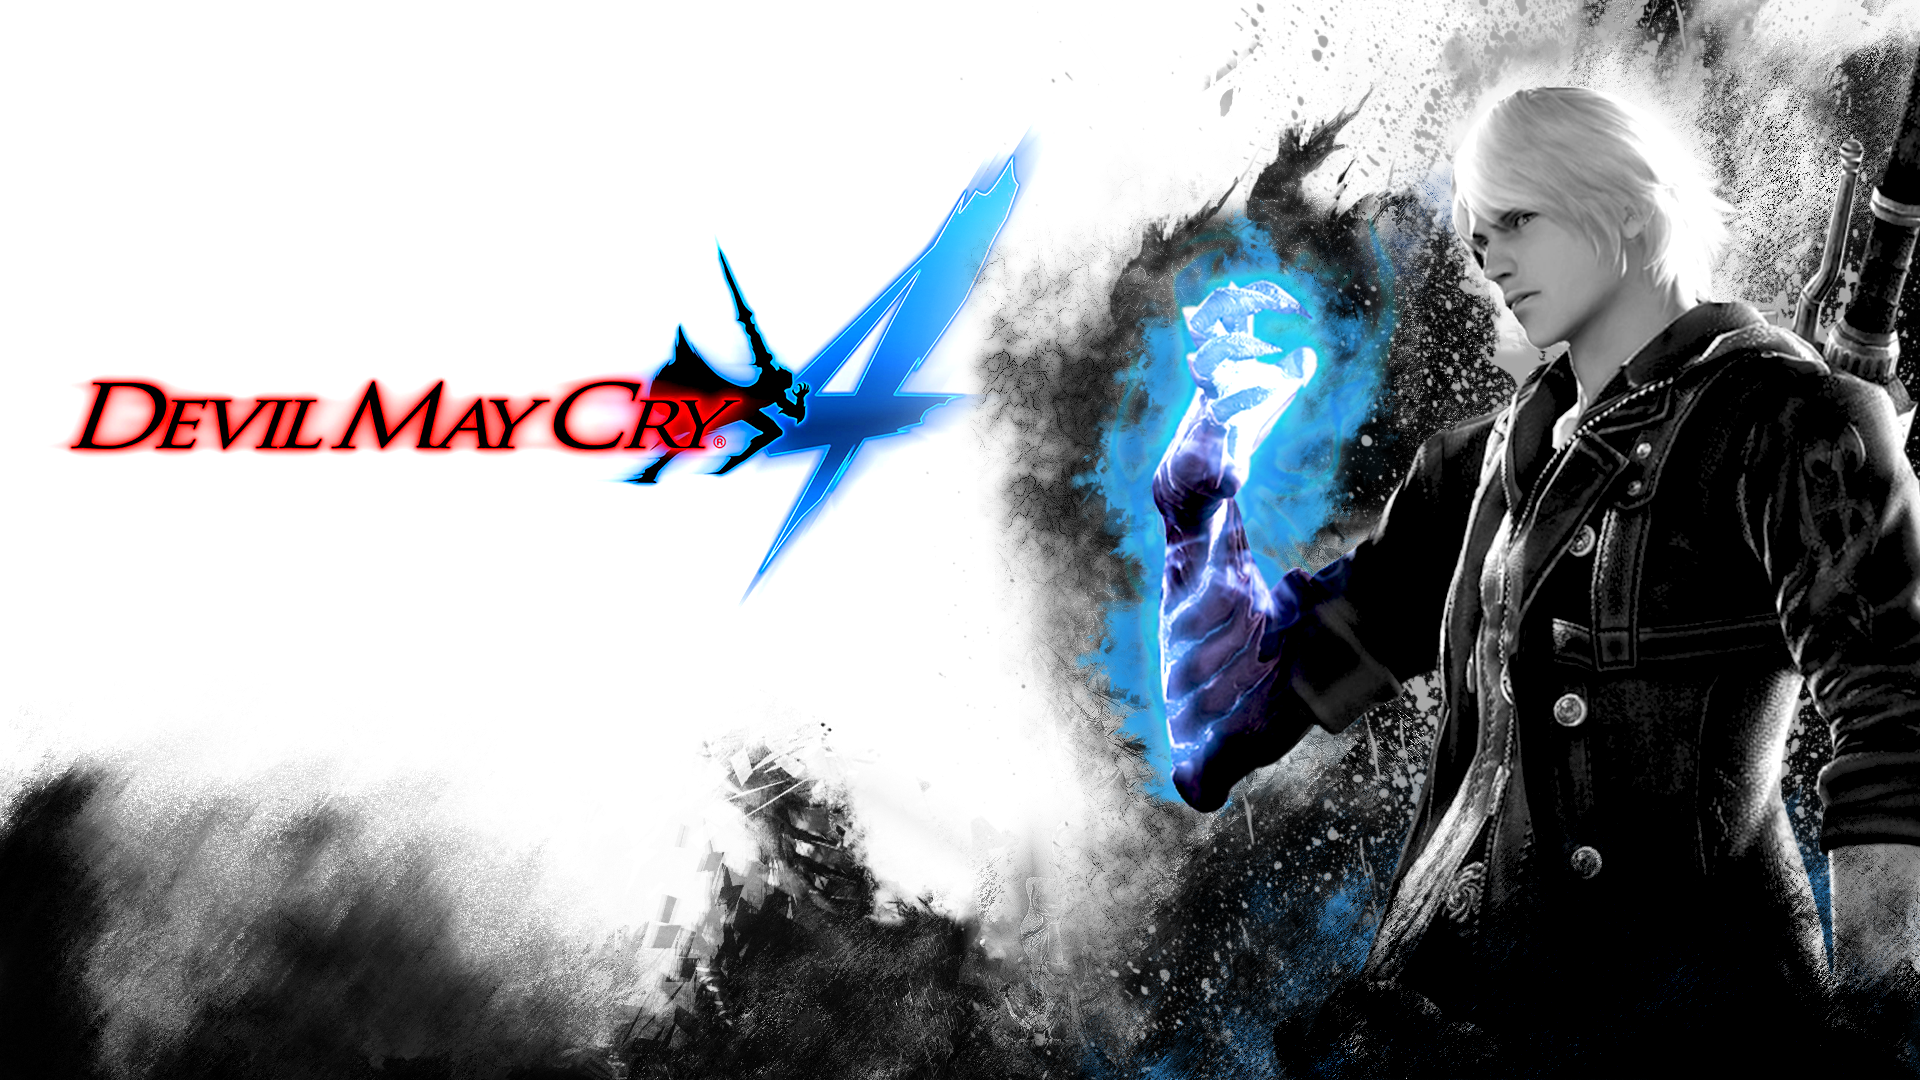 TeamXPG Trainer+7] Devil May Cry 4 [Updated] | XPG Gaming Community